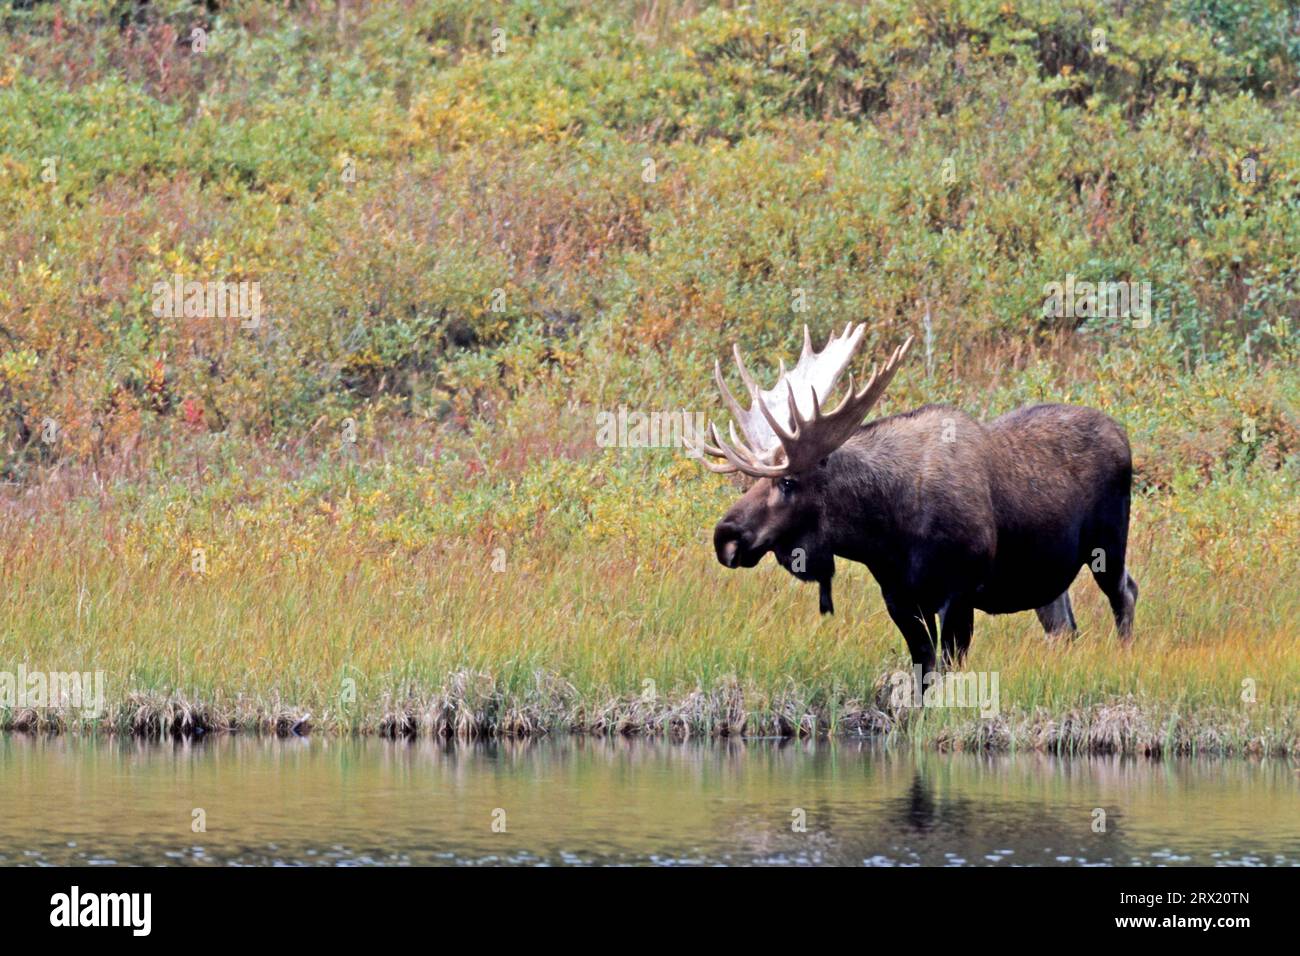 Elks are very good swimmers (Alaskan moose) (Photo moose (Alces alces) scoopers at a Tundra lake), Moose are excellent swimmers (Alaskan moose) Stock Photo